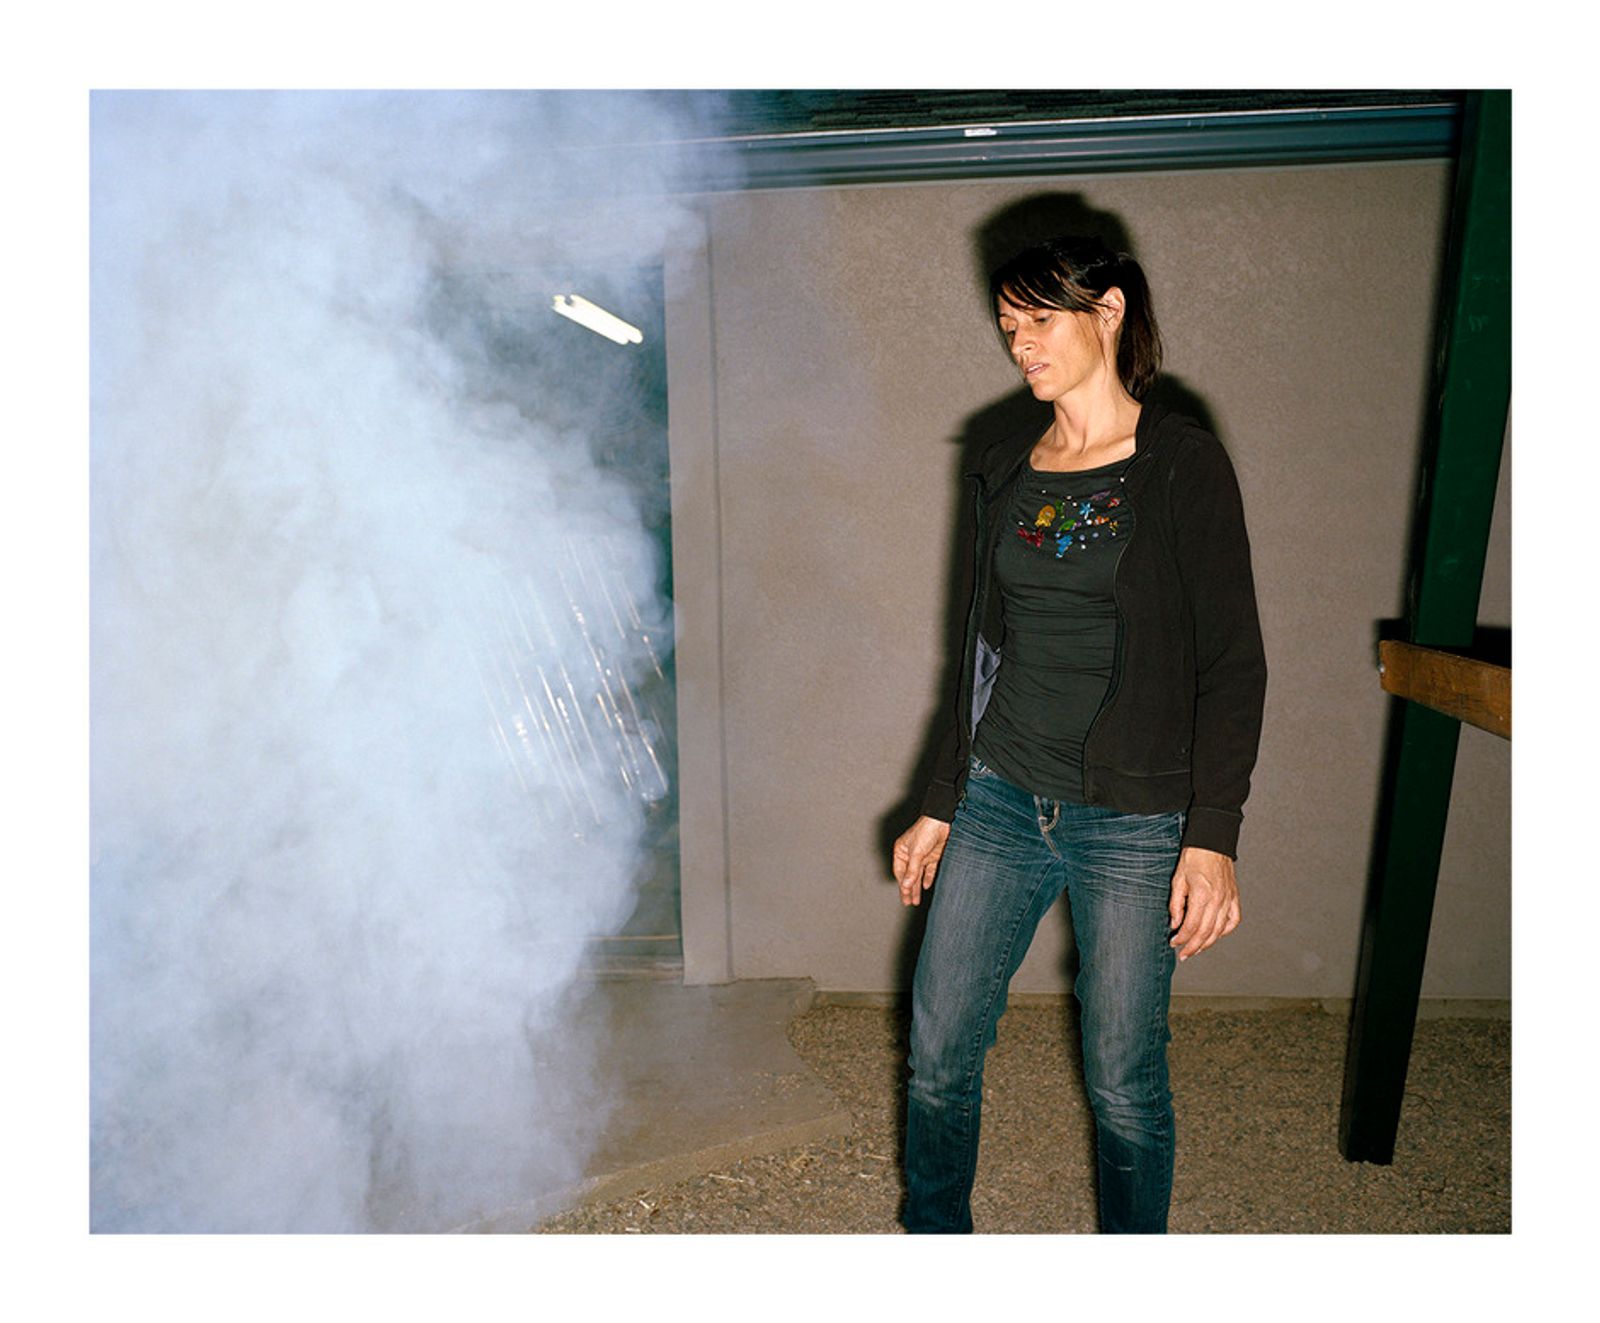 © Serge J-f. Levy - Image from the Fire in the Freezer photography project